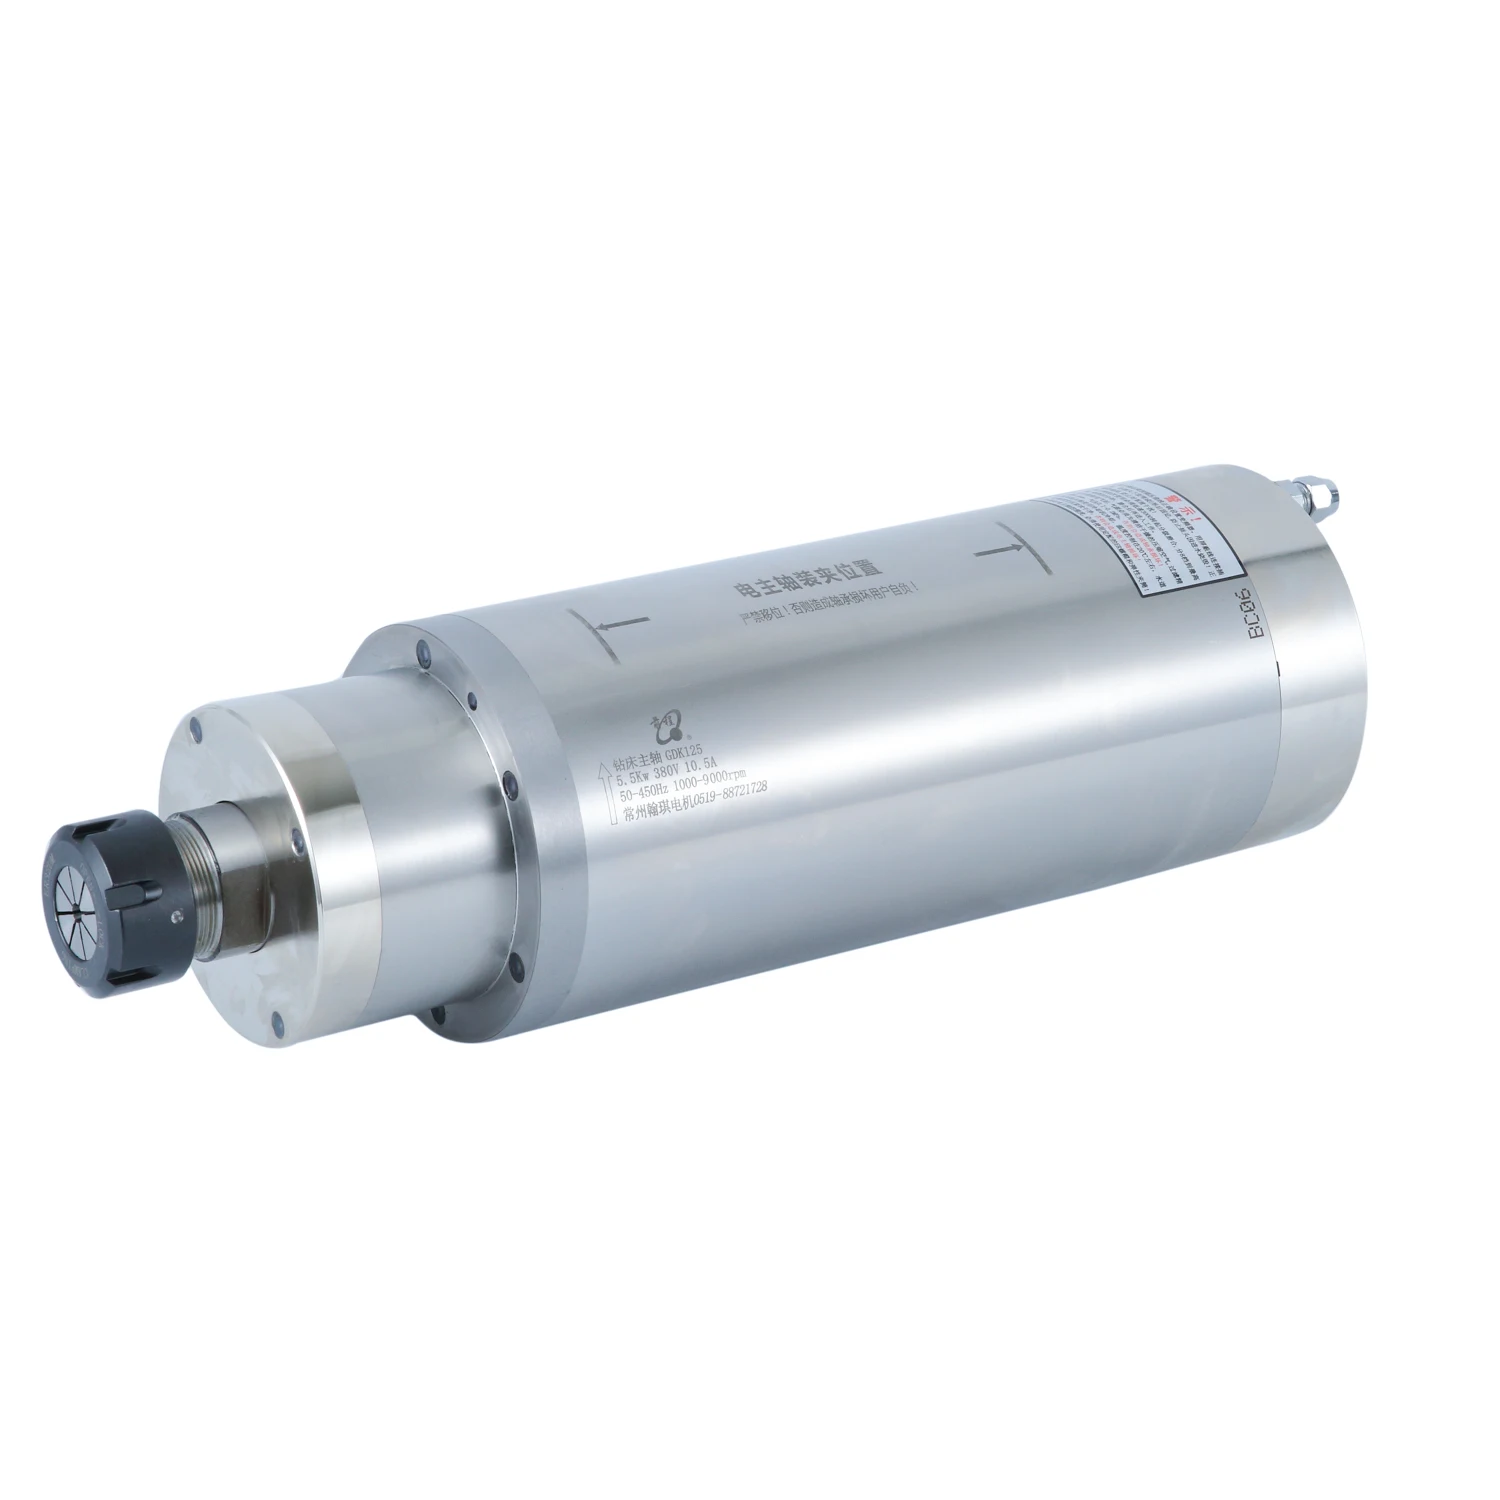 GDK125-9Z/5.5  Cheap Price  spindle  ER32 GDK125-9Z/5.5kw  11A for CNC Router spindle motor